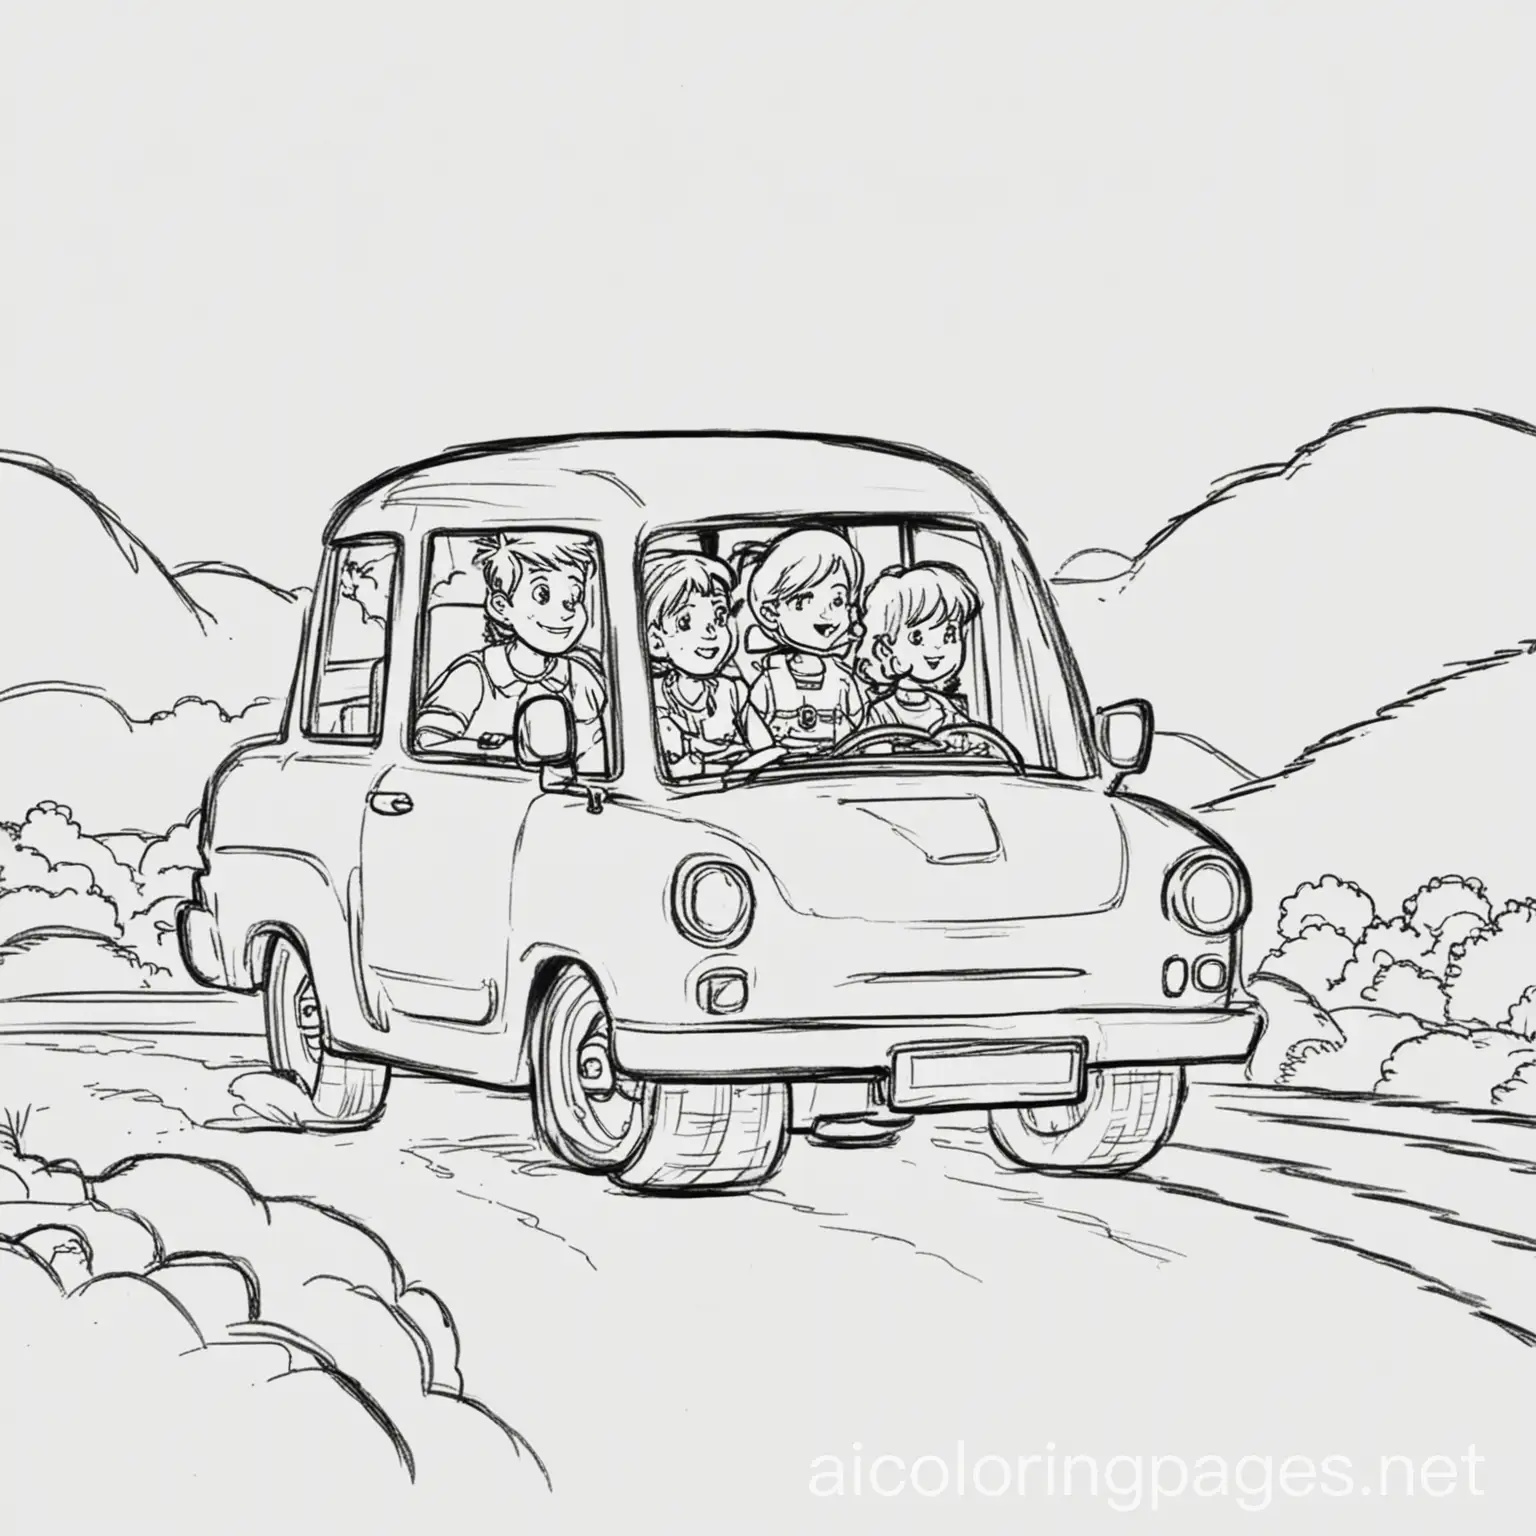 Family on a road trip in a car
, Coloring Page, black and white, line art, white background, Simplicity, Ample White Space. The background of the coloring page is plain white to make it easy for young children to color within the lines. The outlines of all the subjects are easy to distinguish, making it simple for kids to color without too much difficulty